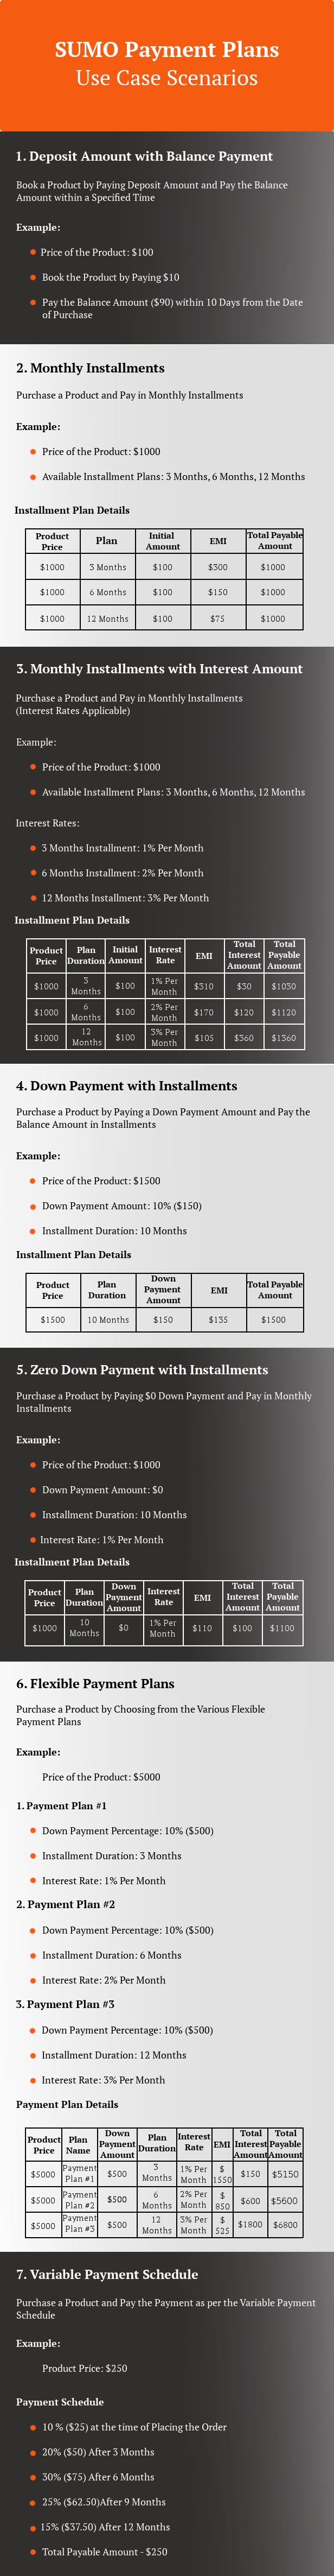 SUMO WooCommerce Payment Plans - Deposits, Down Payments, Installments, Variable Payments etc - 5